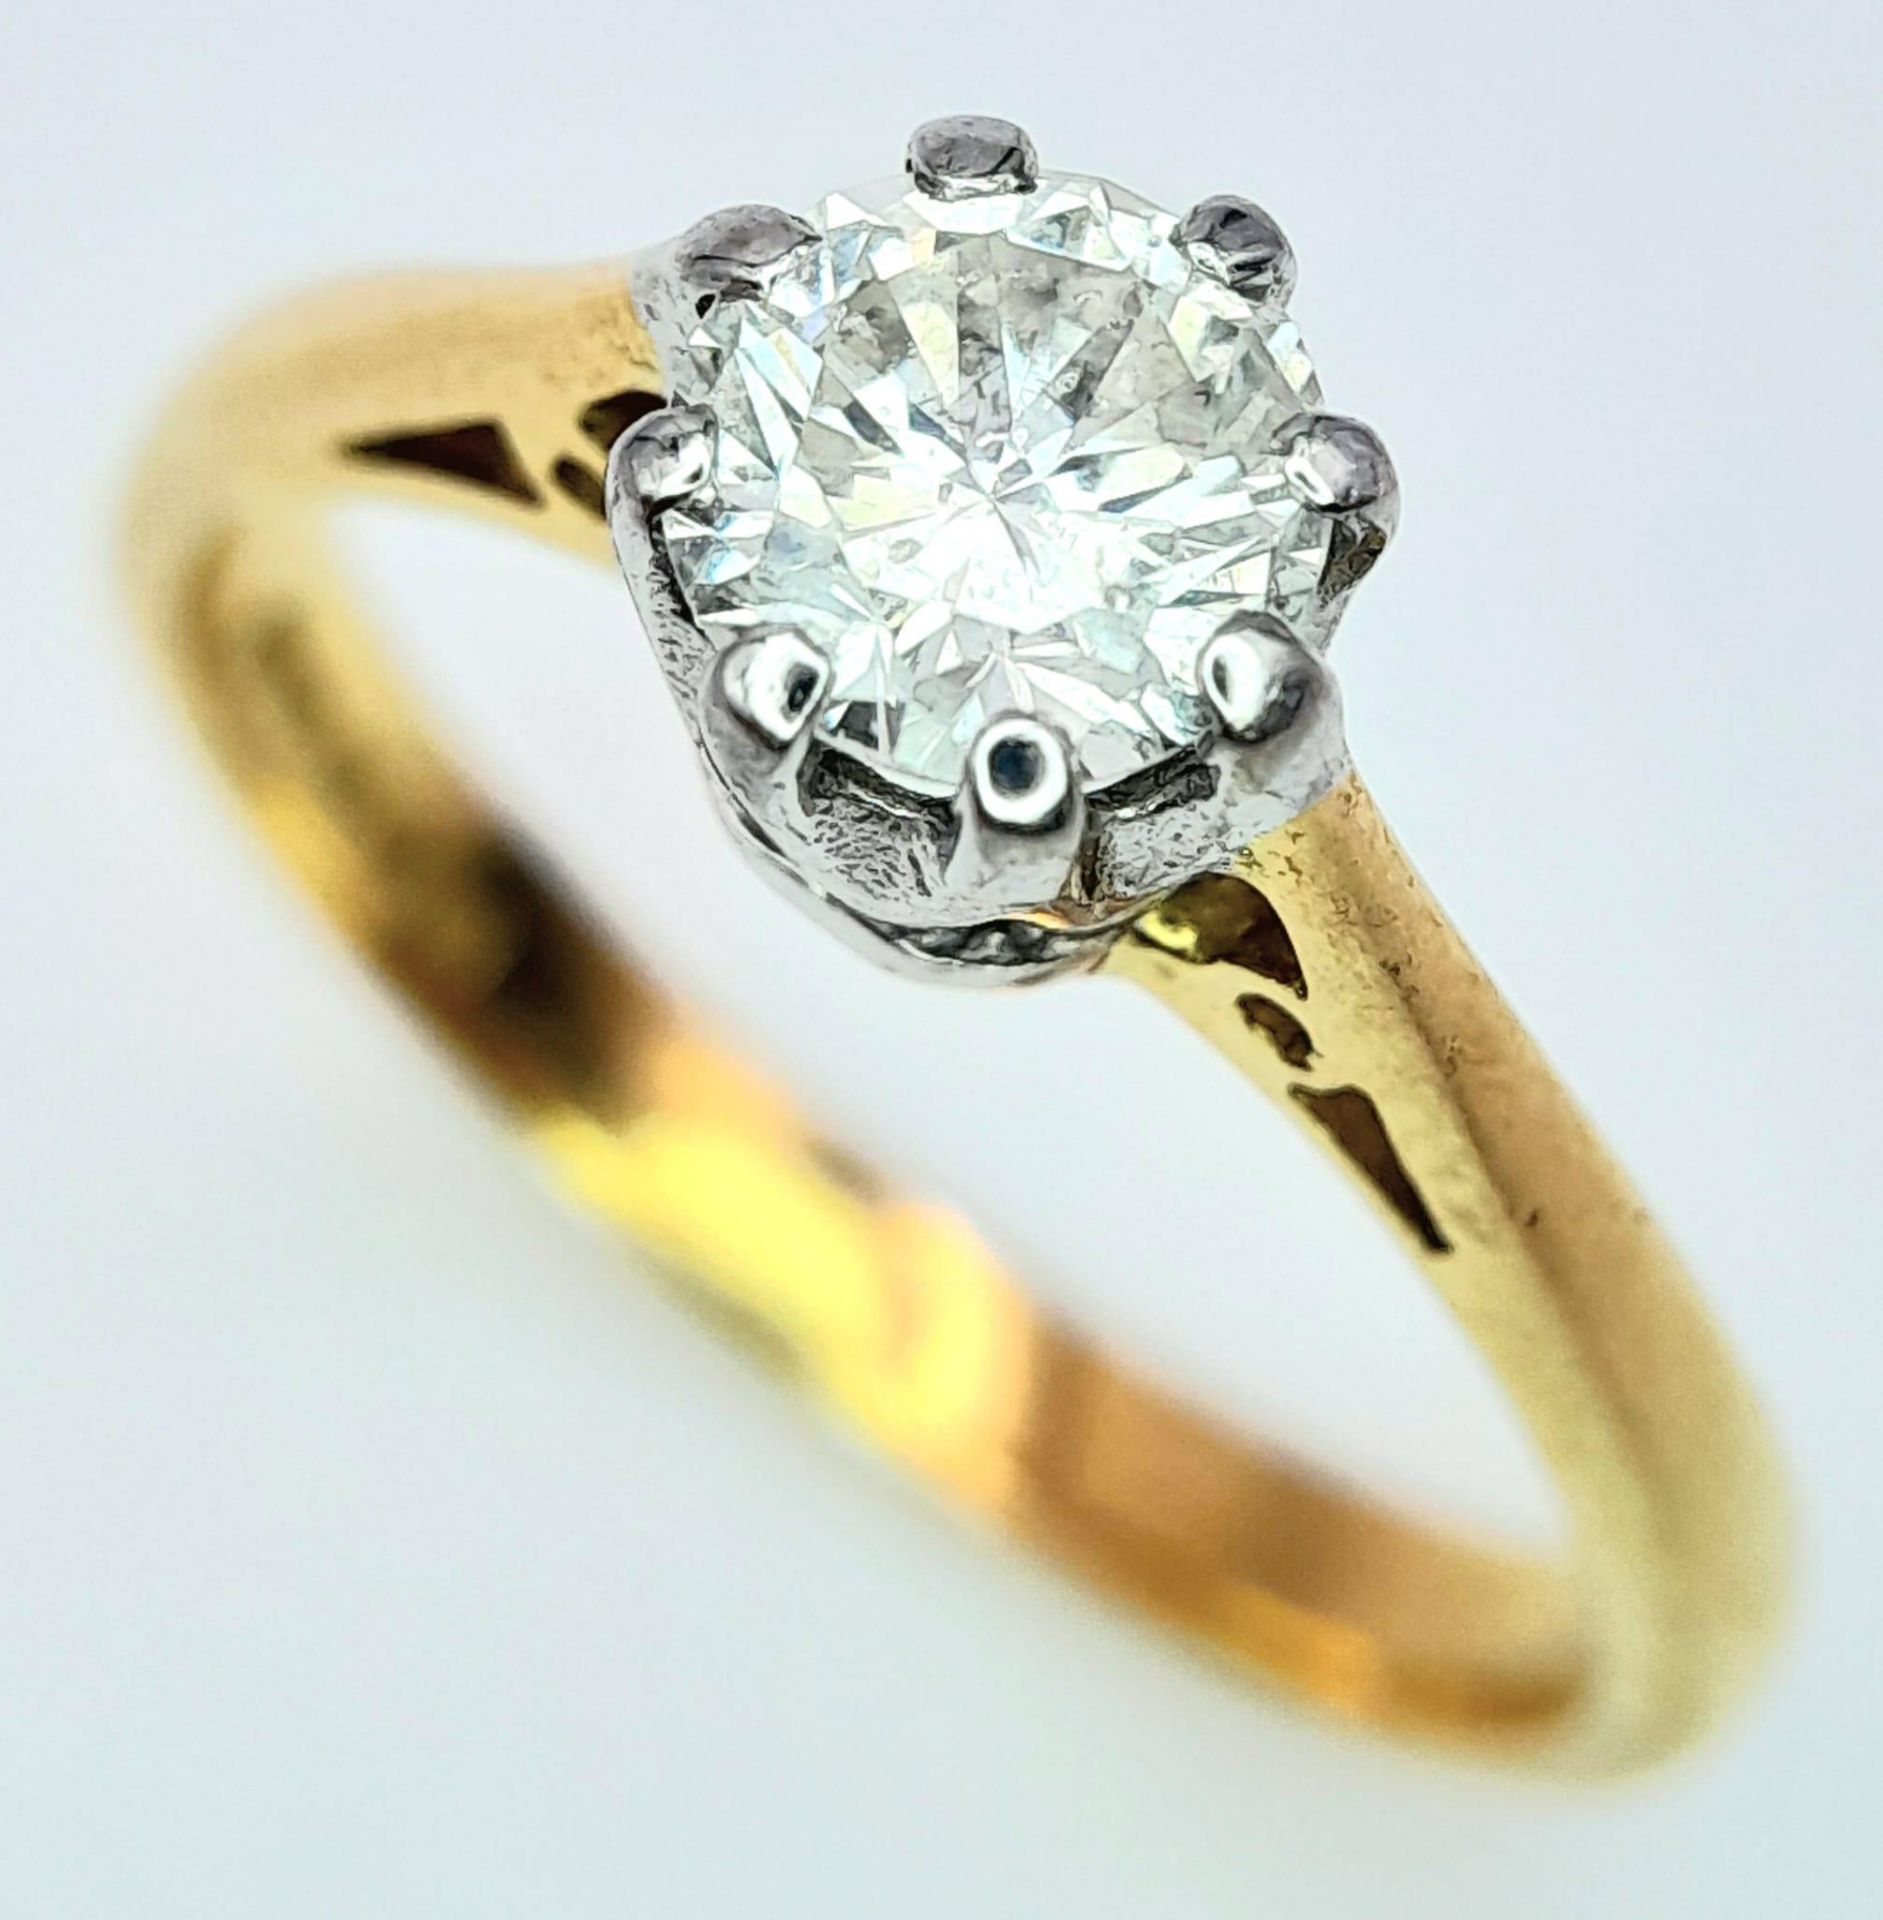 AN 18K YELLOW GOLD DIAMOND SOLITAIRE RING - 0.65CT. 8 CLAW SETTING. 3.4G. SIZE L. - Image 2 of 5